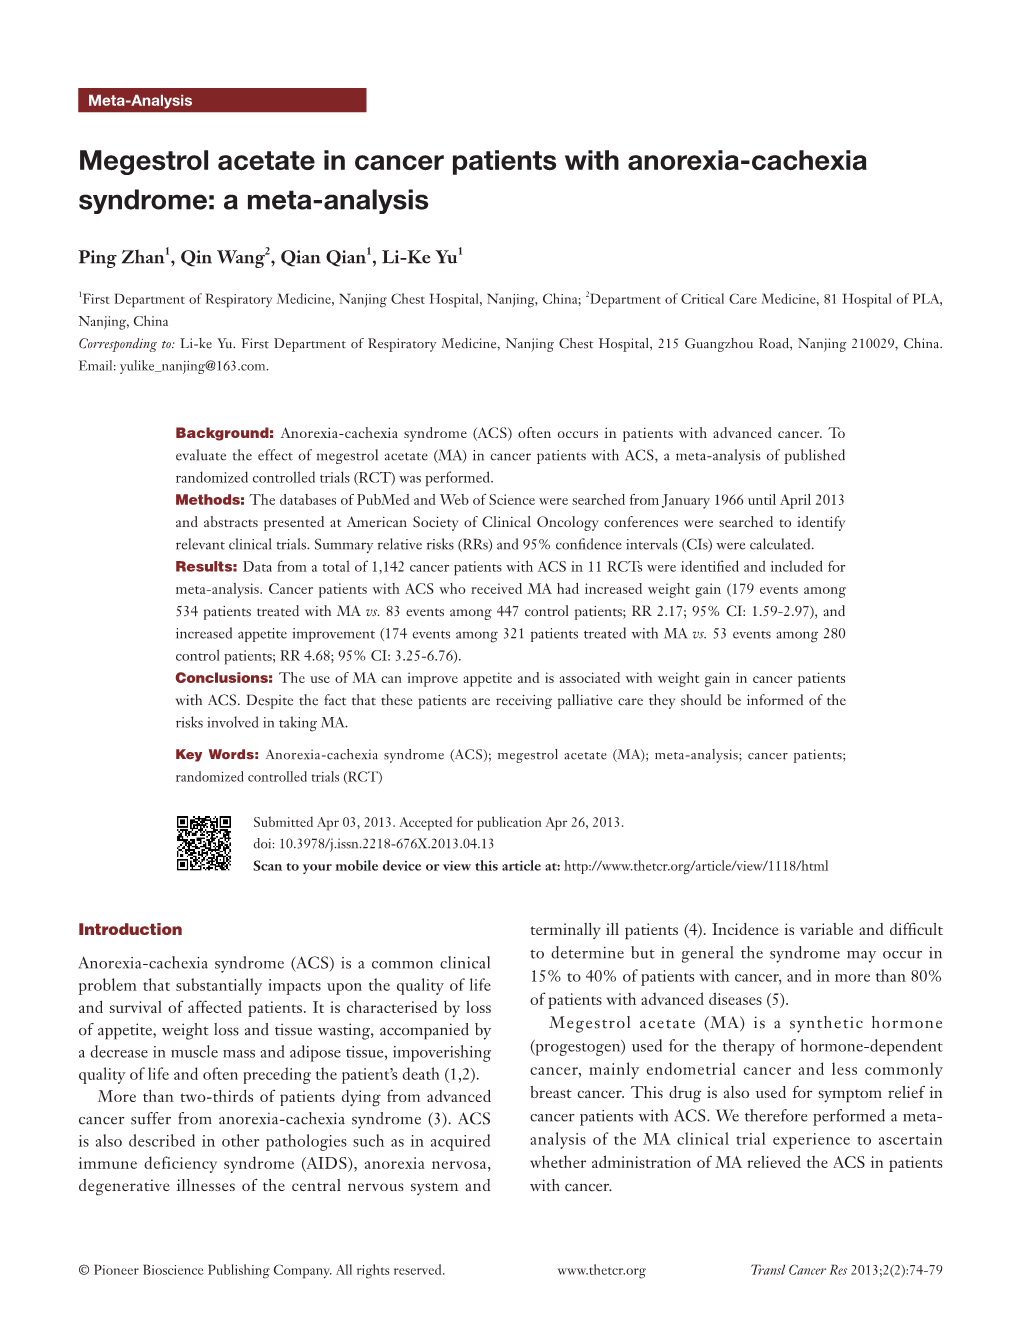 Megestrol Acetate in Cancer Patients with Anorexia-Cachexia Syndrome: a Meta-Analysis